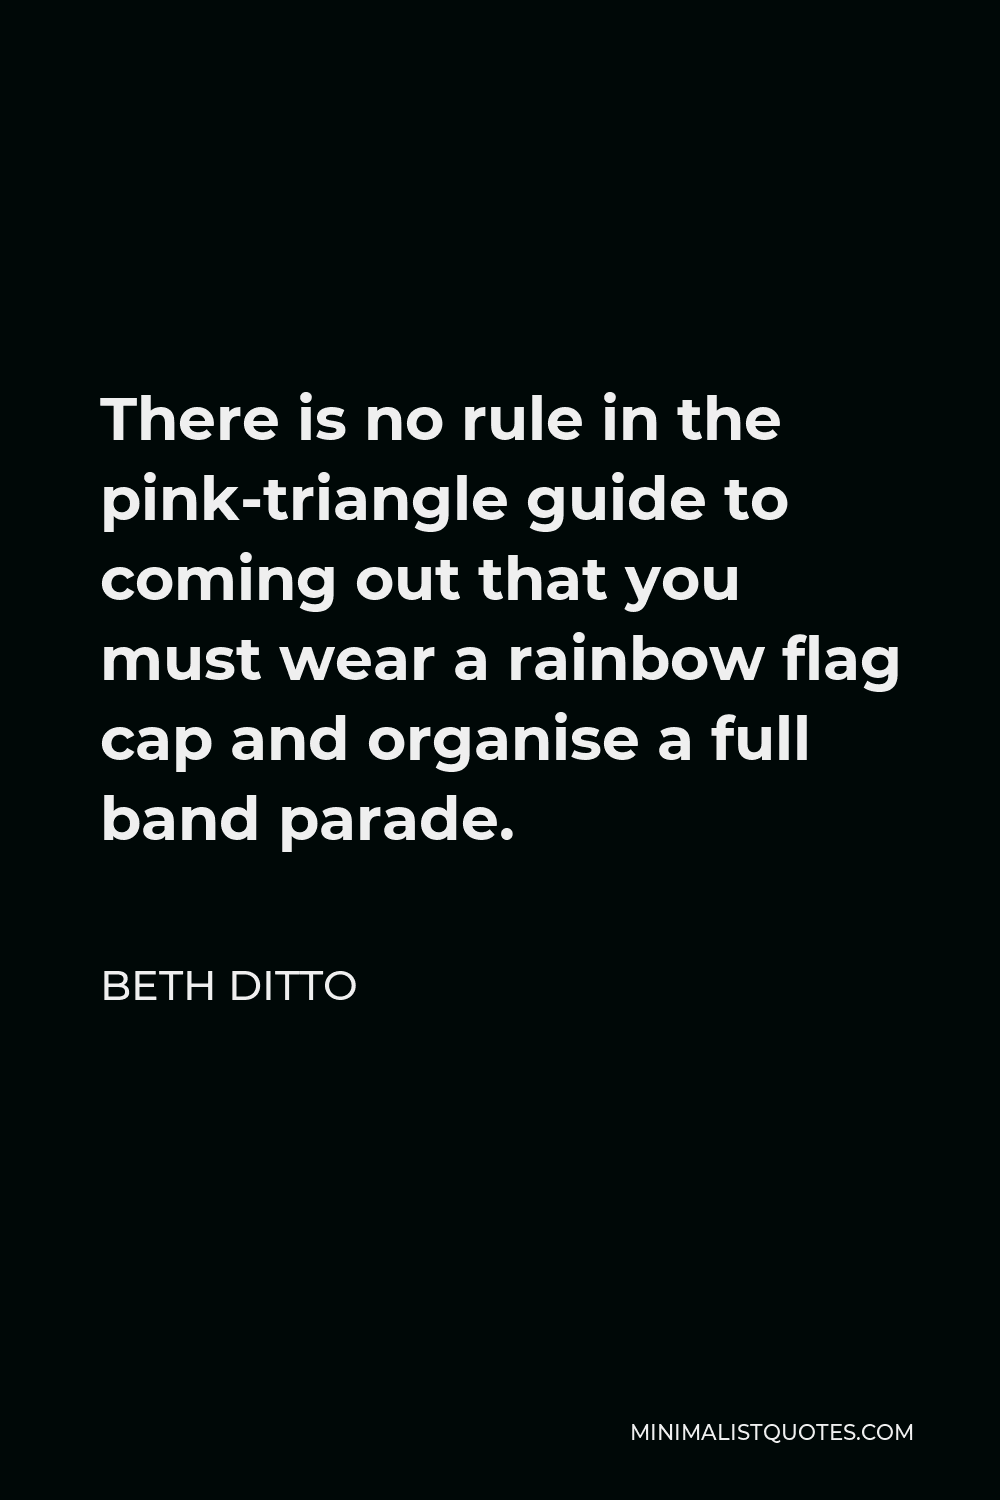 Beth Ditto Quote - There is no rule in the pink-triangle guide to coming out that you must wear a rainbow flag cap and organise a full band parade.